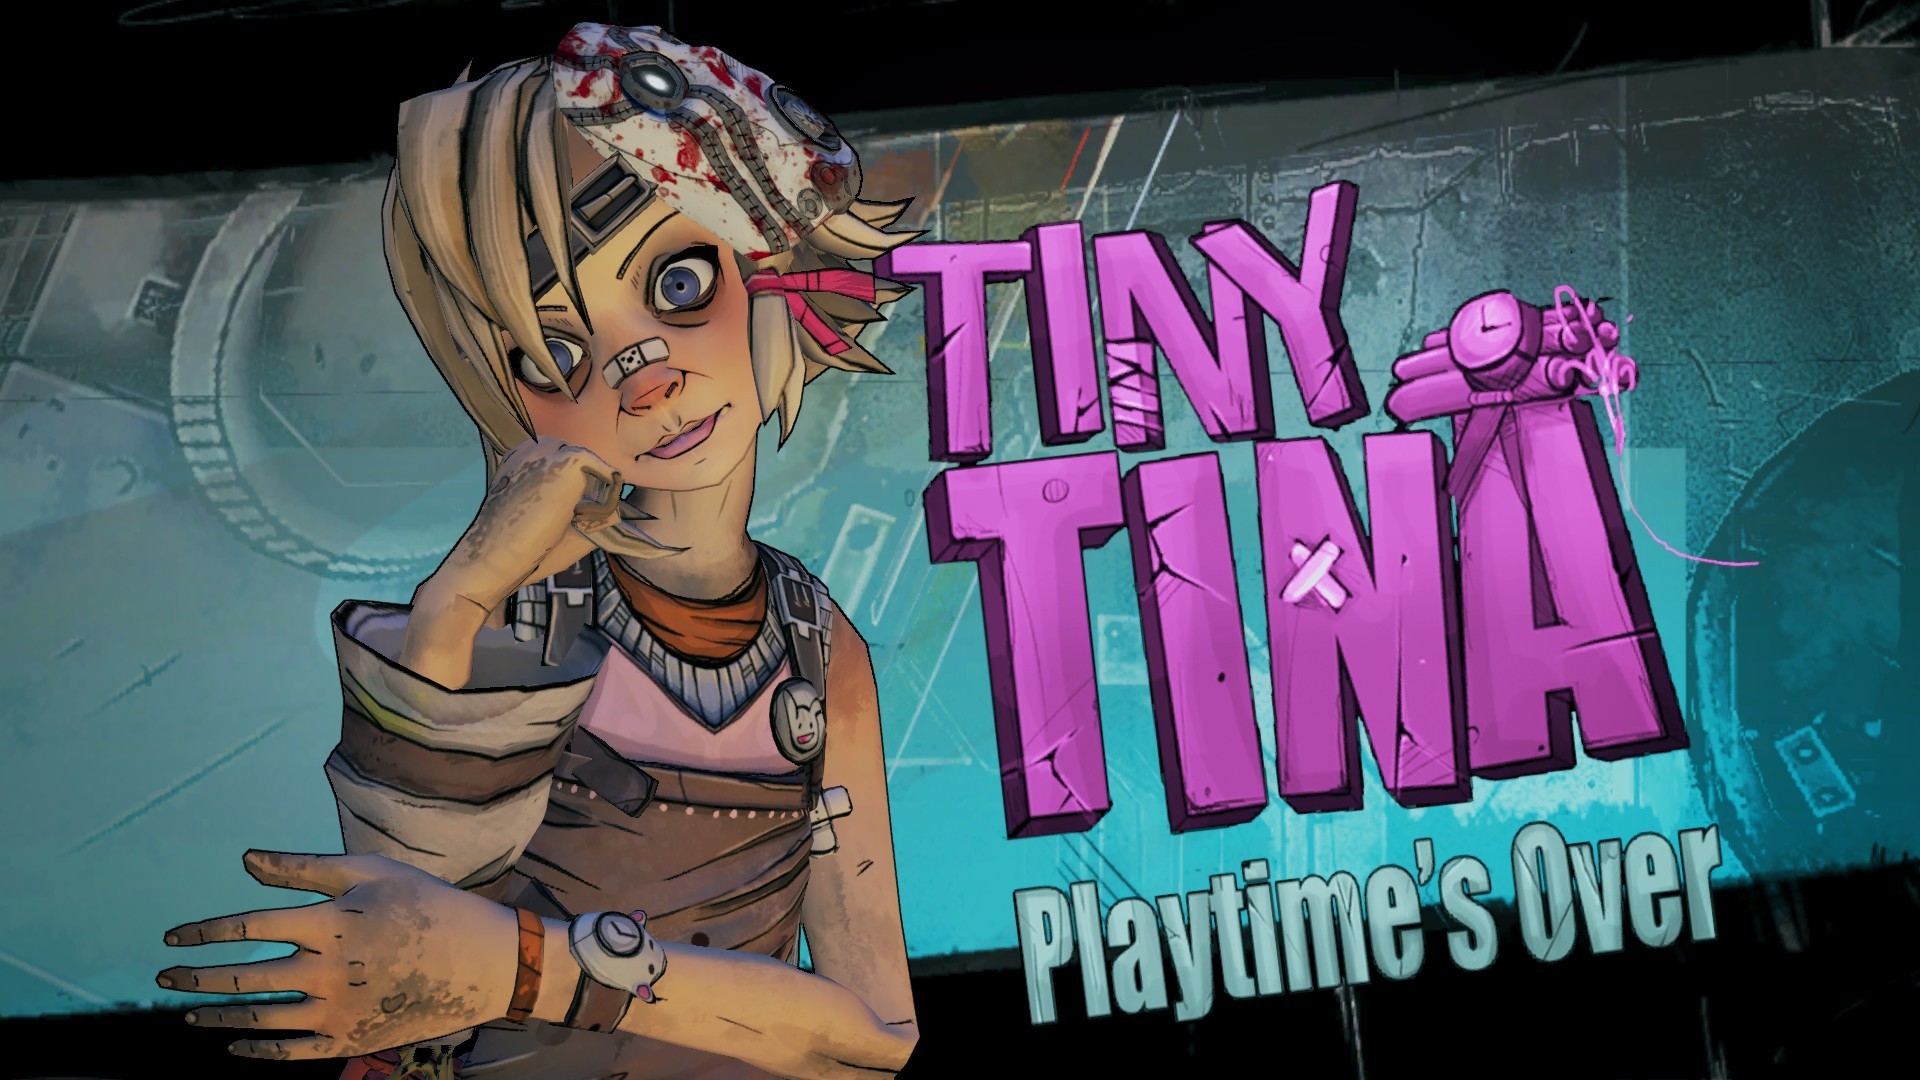 General 1920x1080 Borderlands Borderlands 2 Tiny Tina video games video game girls pink lipstick PC gaming science fiction women science fiction blue eyes wristwatch cyan